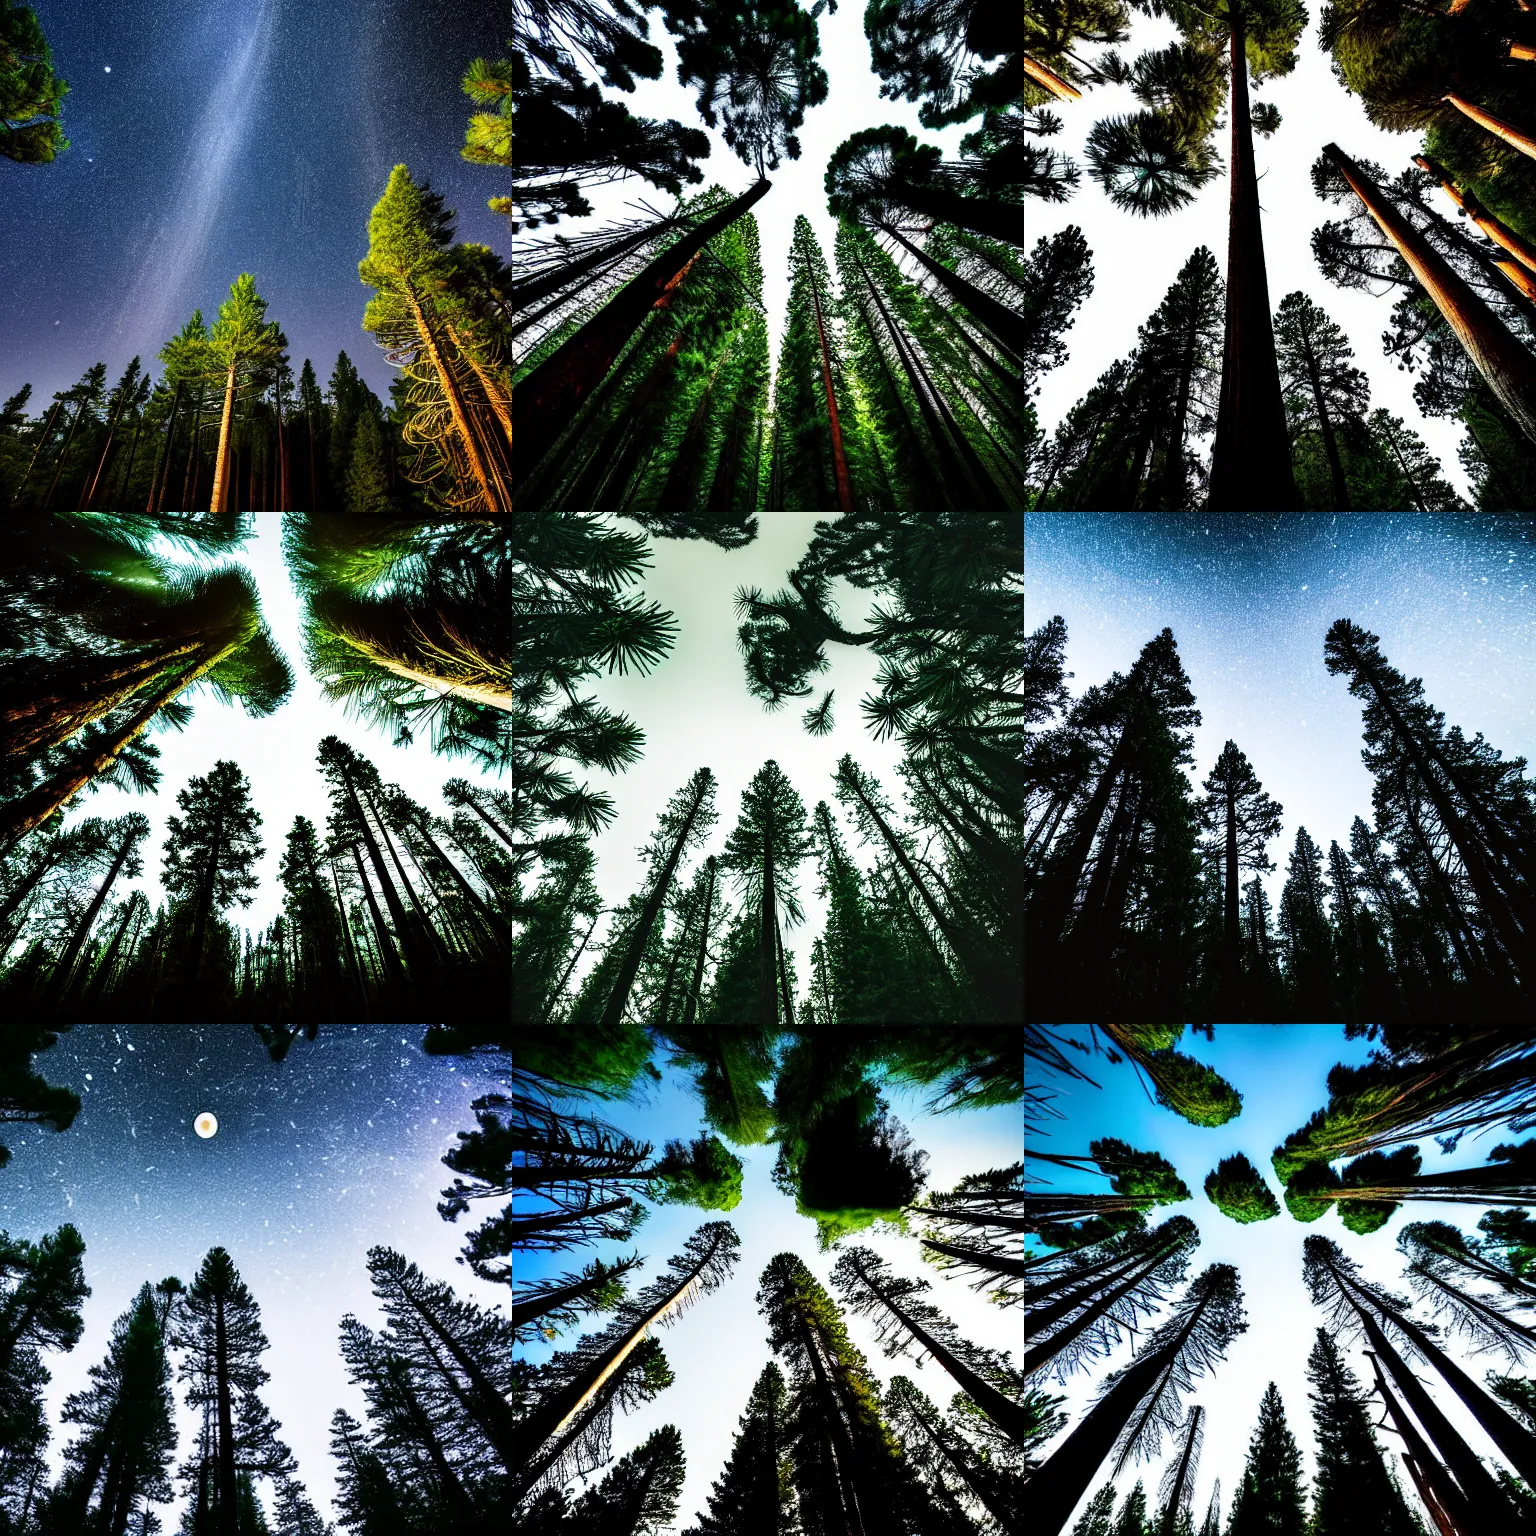 Prompt: a landscape photograph of very tall pine trees in a forest, midnight, saturn in the sky, landscape photography, dramatic lighting, wide aperture